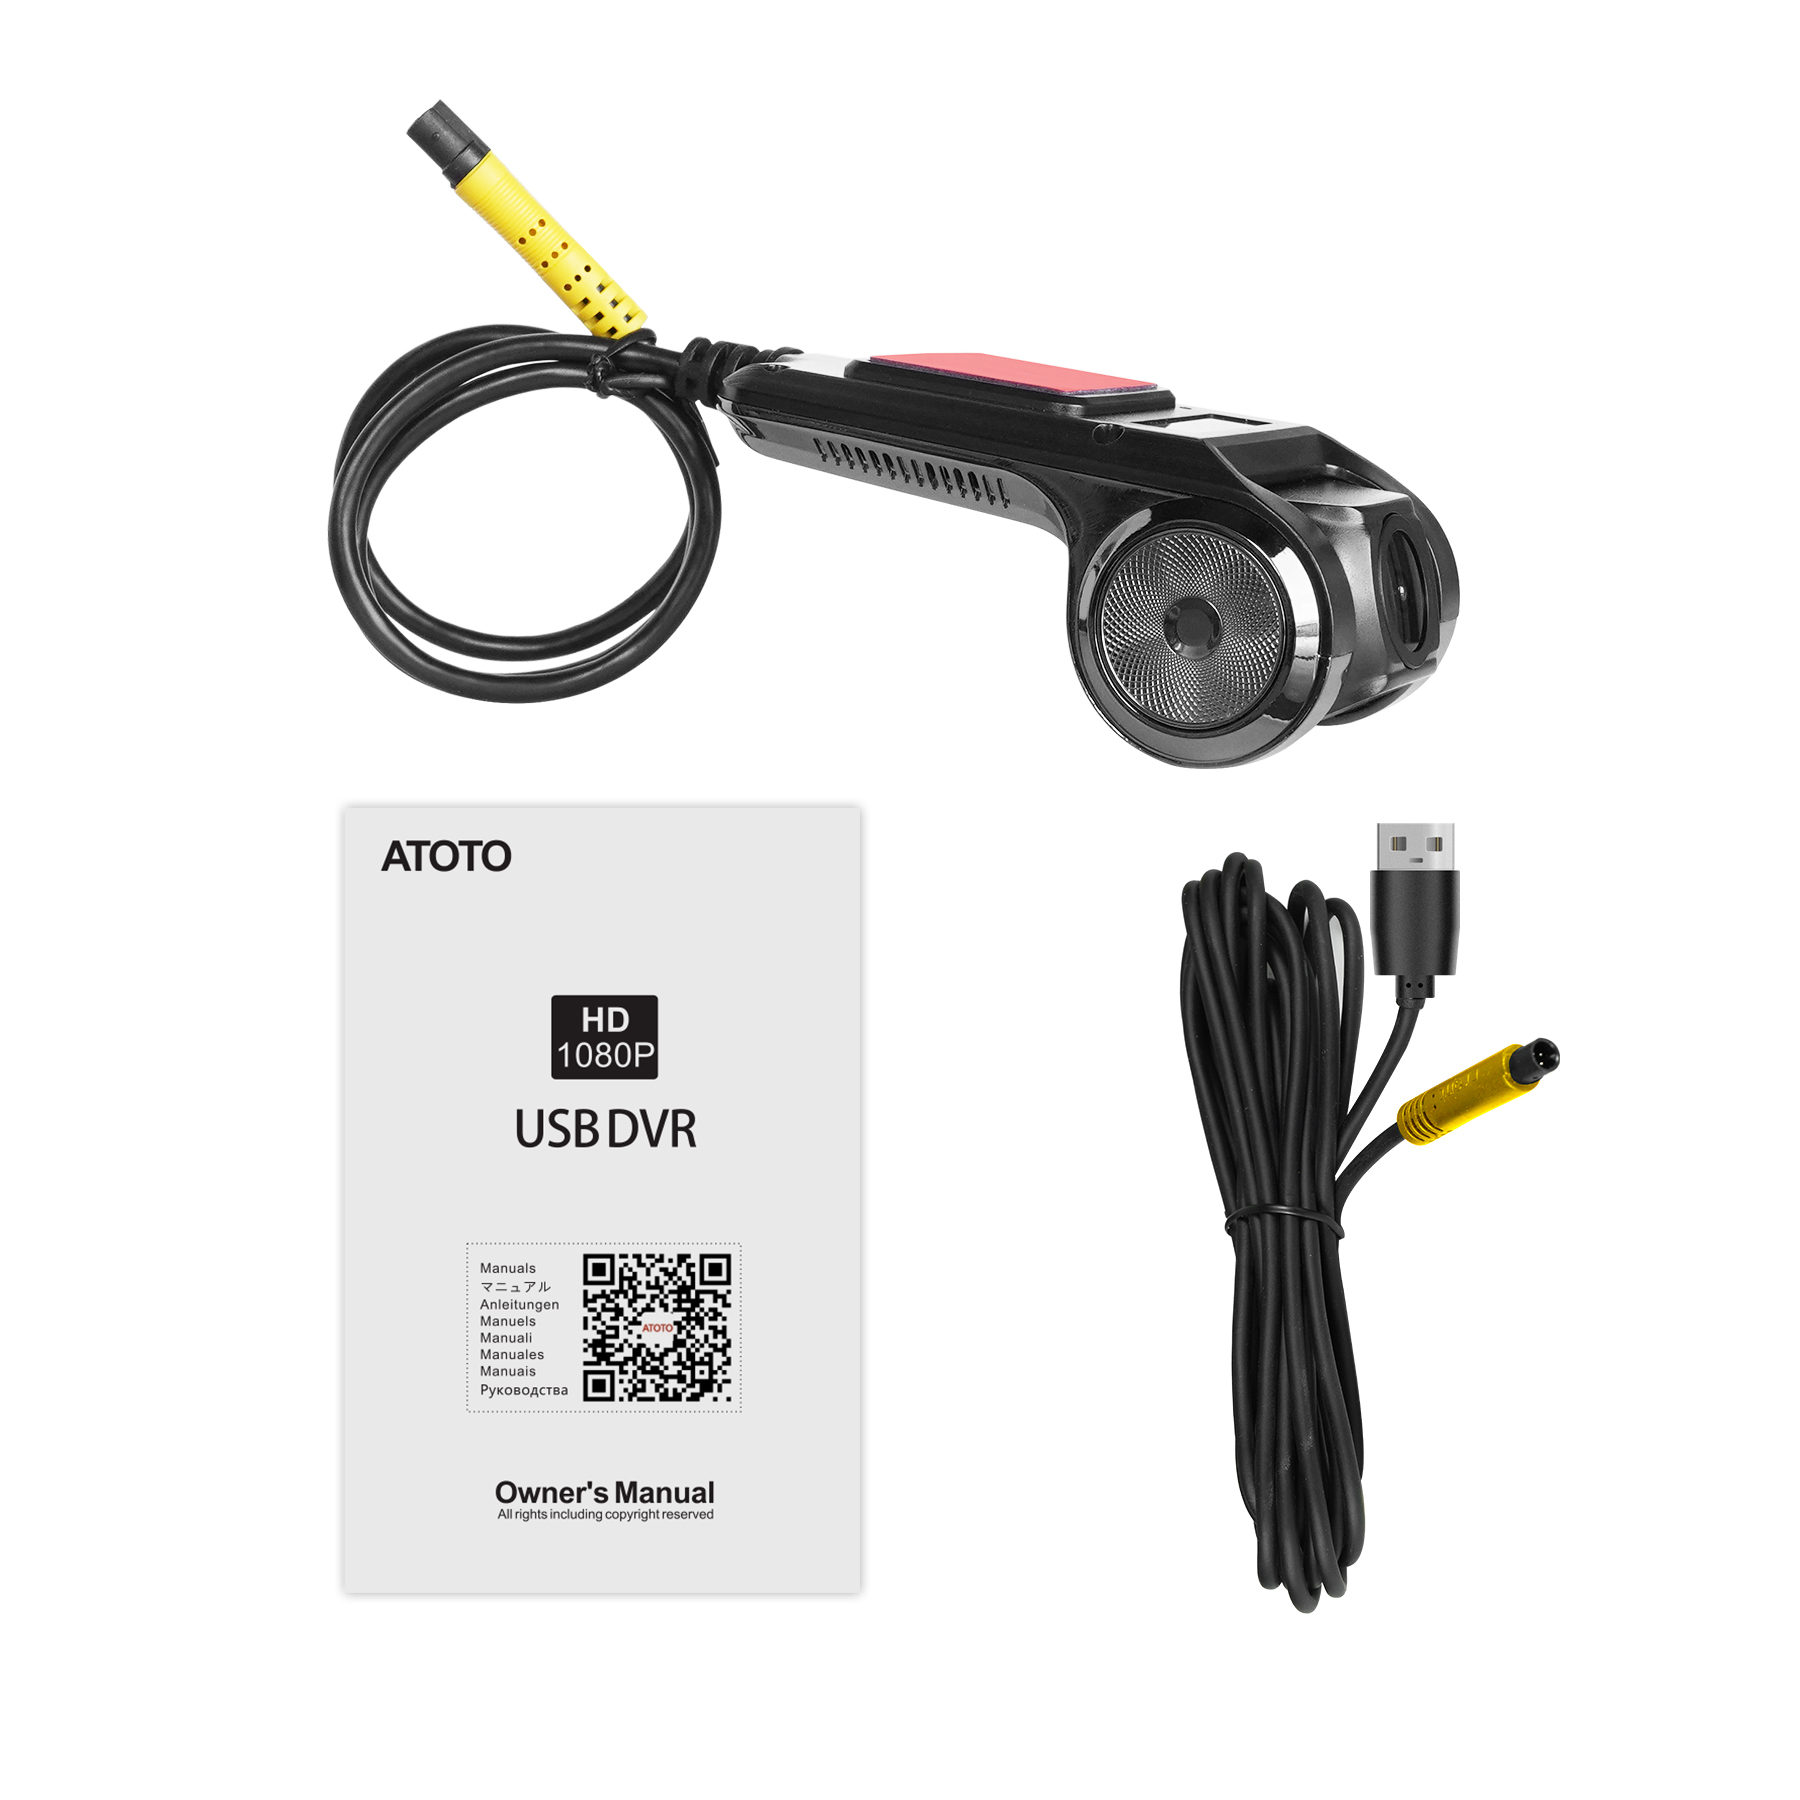 ATOTO AC 44P2 Dashcam 1080P USB DVR On Dash Camera Sony Sensor Image  Recording Video On Camera End Compatible with ATOTO A6 & S8 Series Not  Compatible with F7 Series and P8